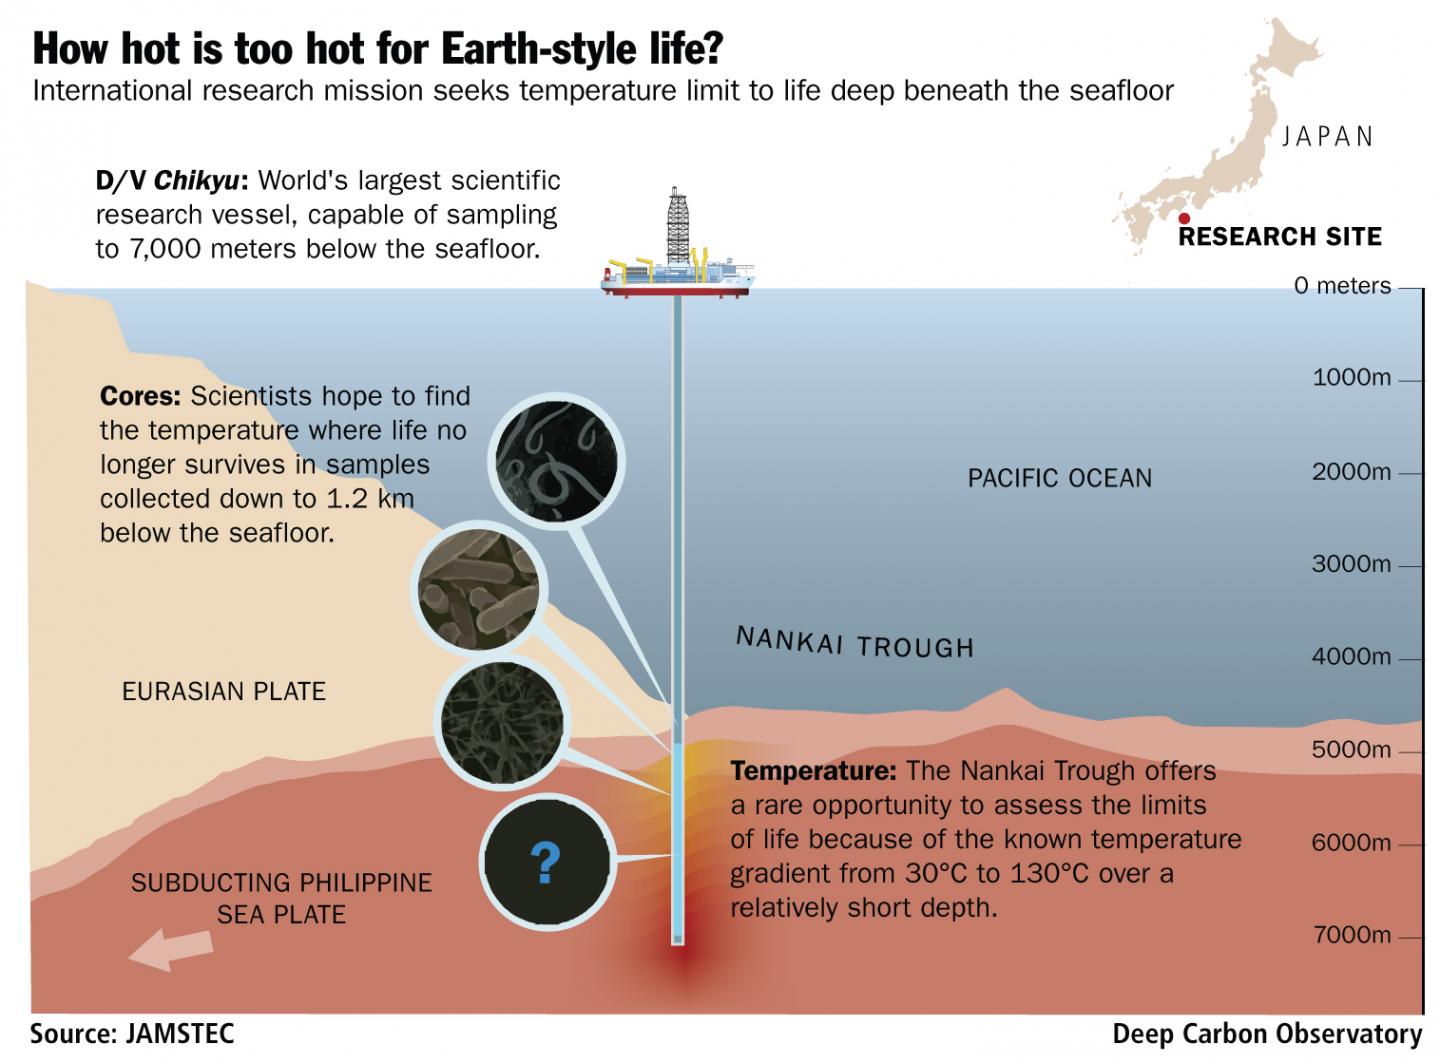 How Hot is Too Hot for Earth-style Life?